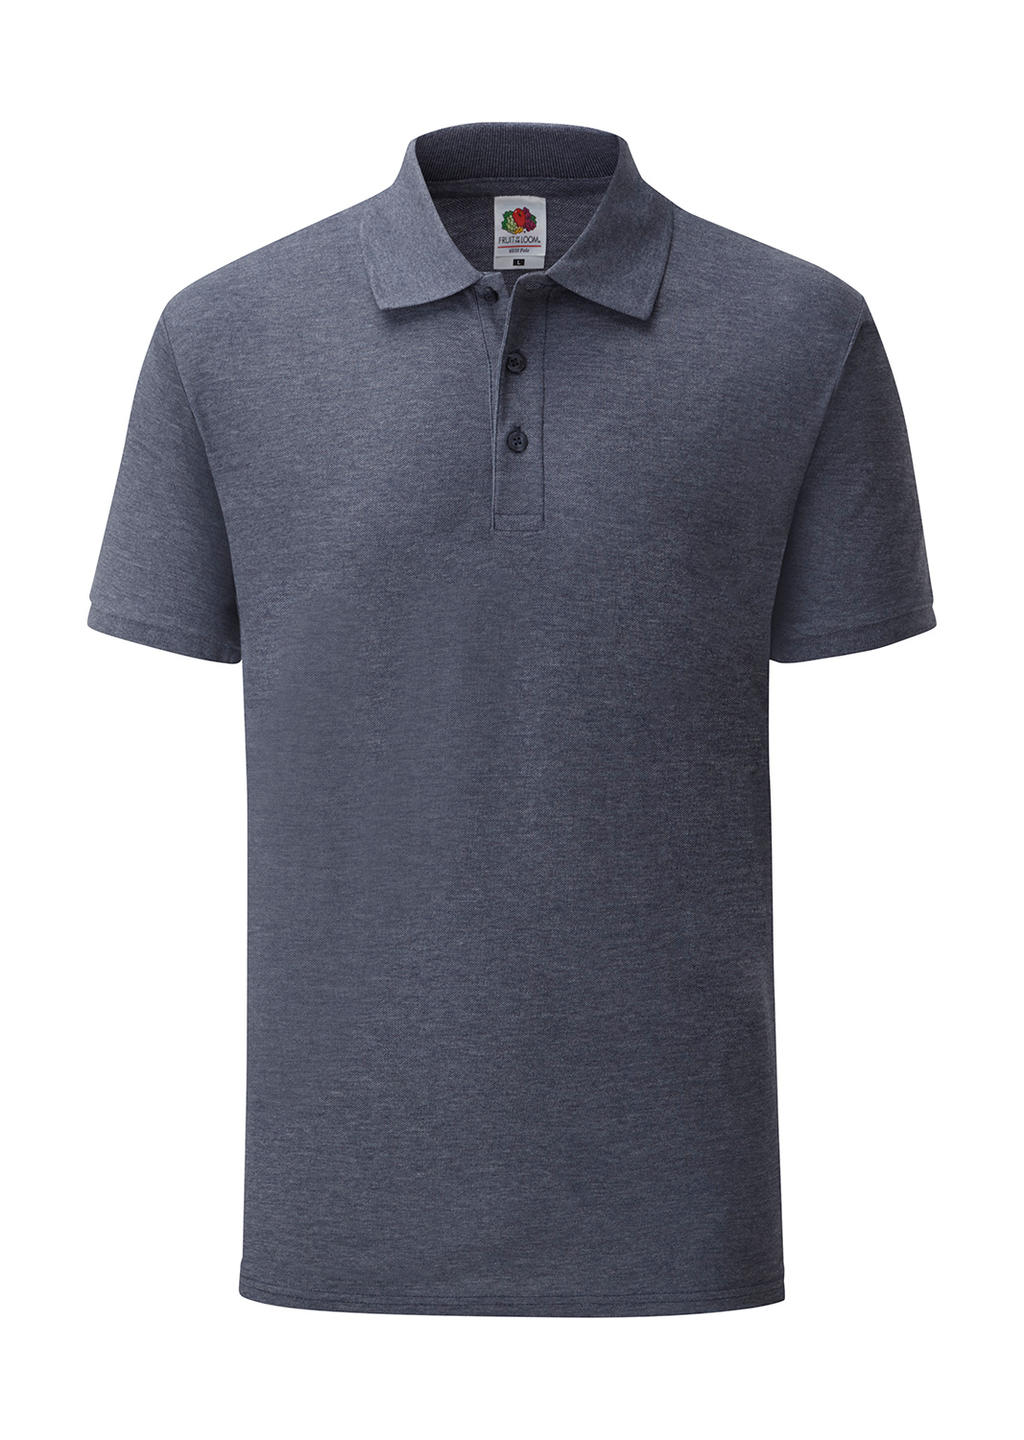  65/35 Polo in Farbe Heather Navy